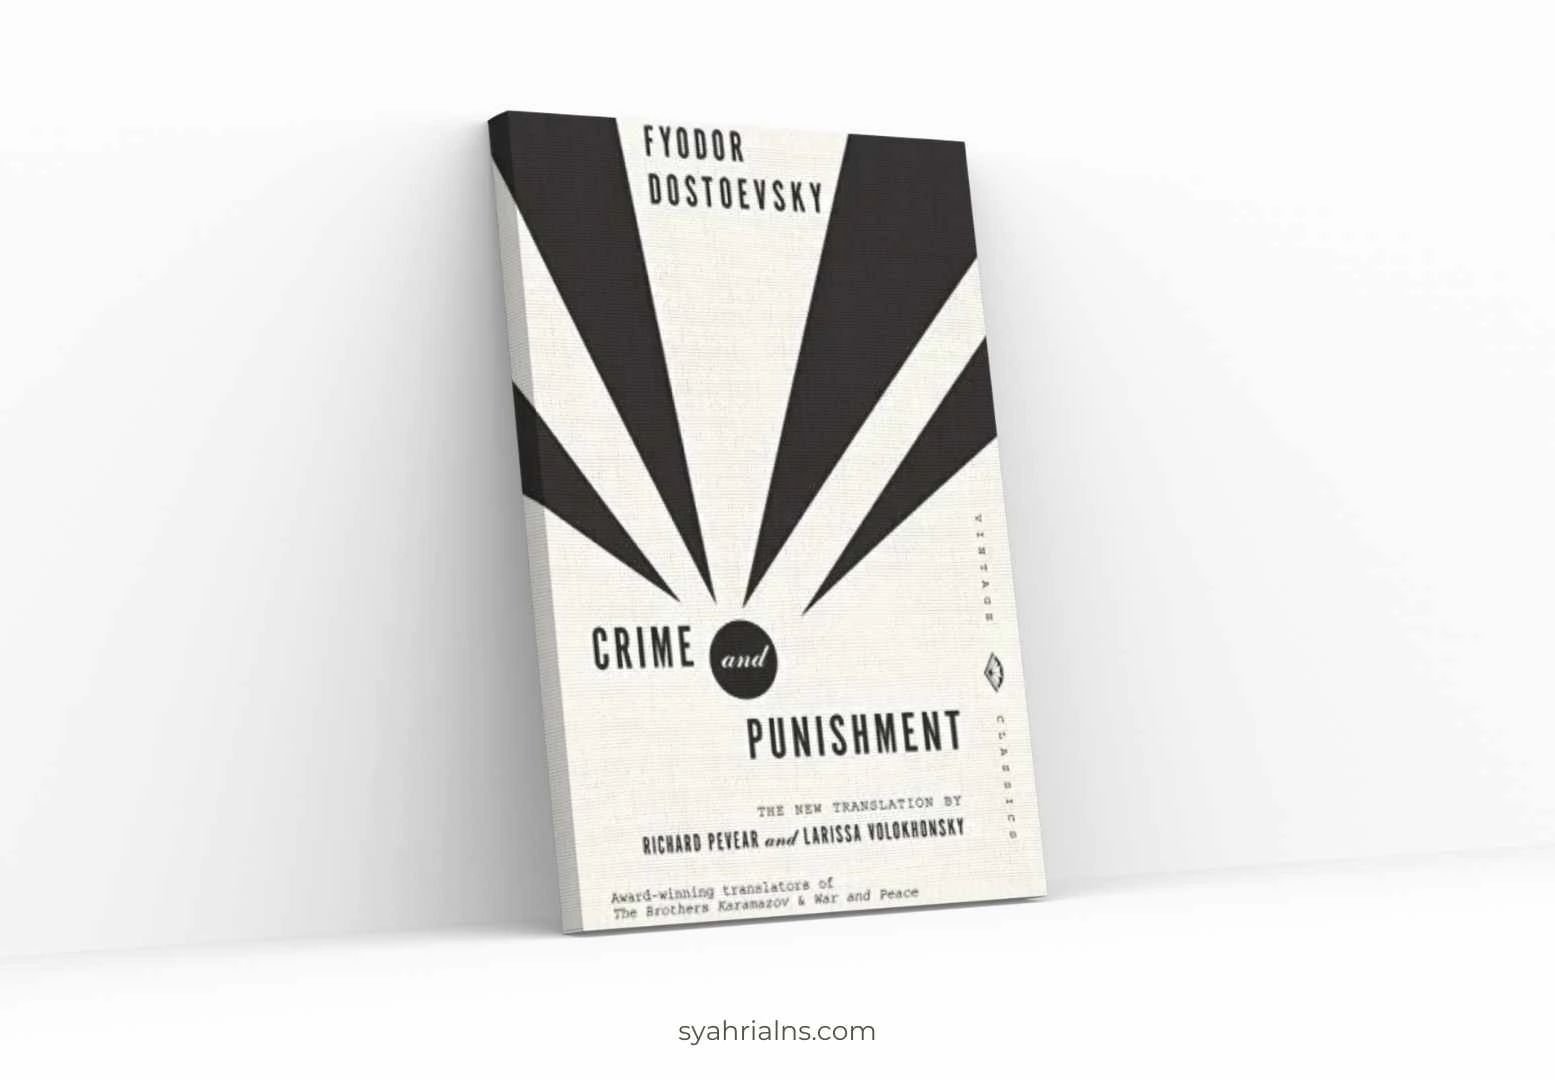 Crime and Punishment by Fyodor Dostoievsky